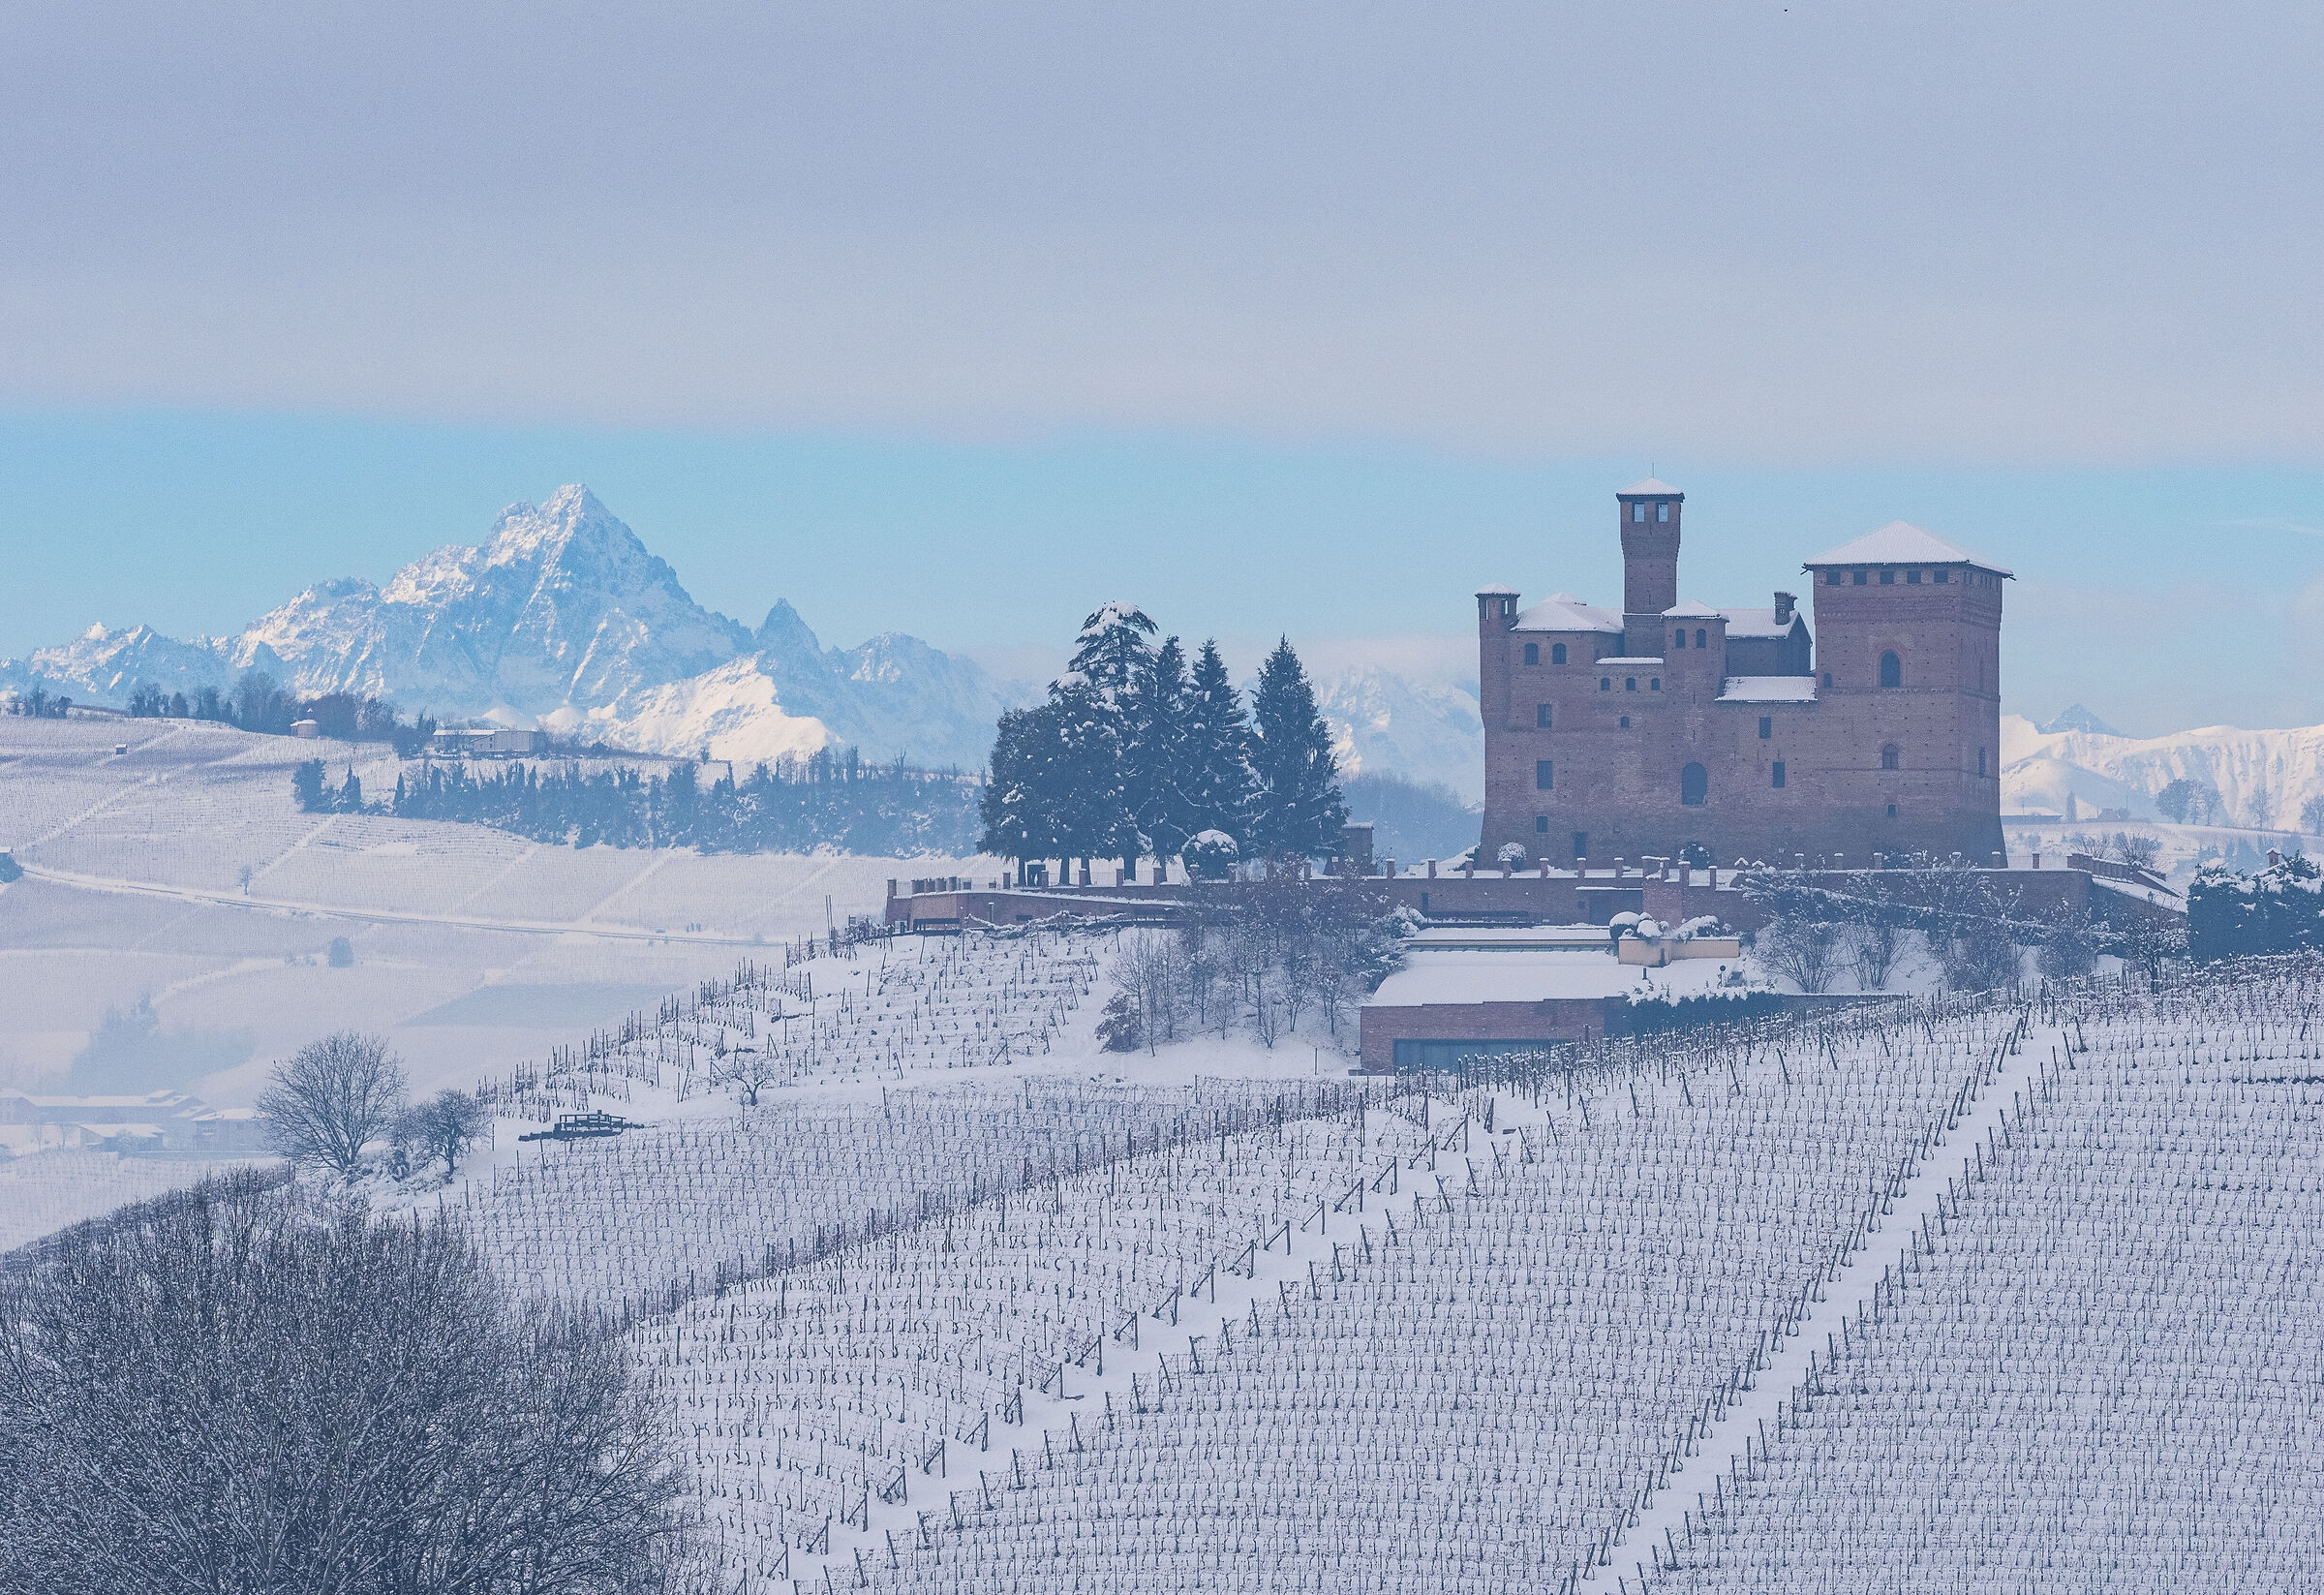 the "Castle and the Mountain" in winter...